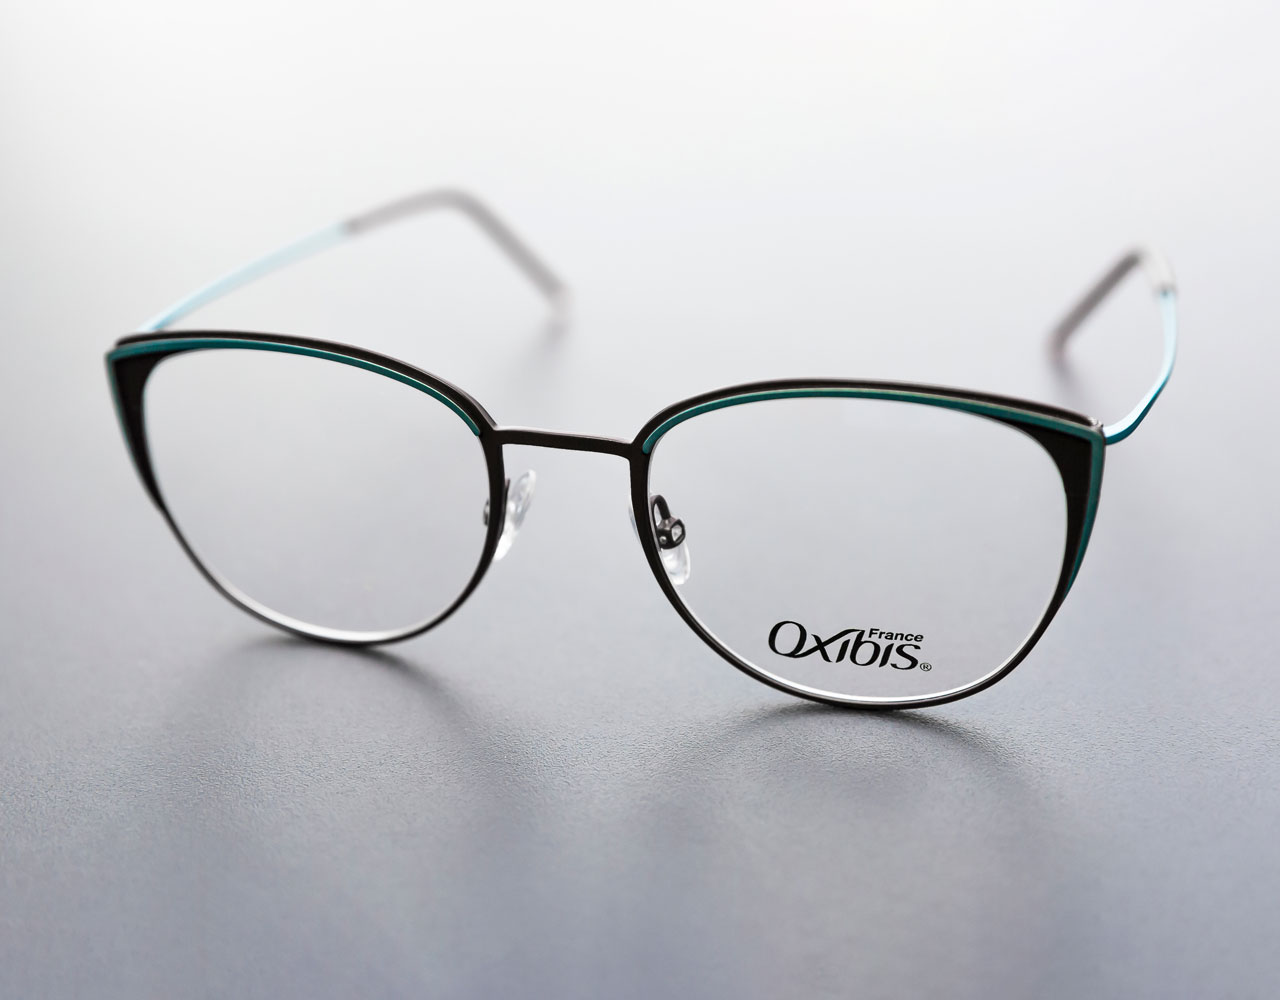 Product photography of Oxibis eyewear for the retail and services industry